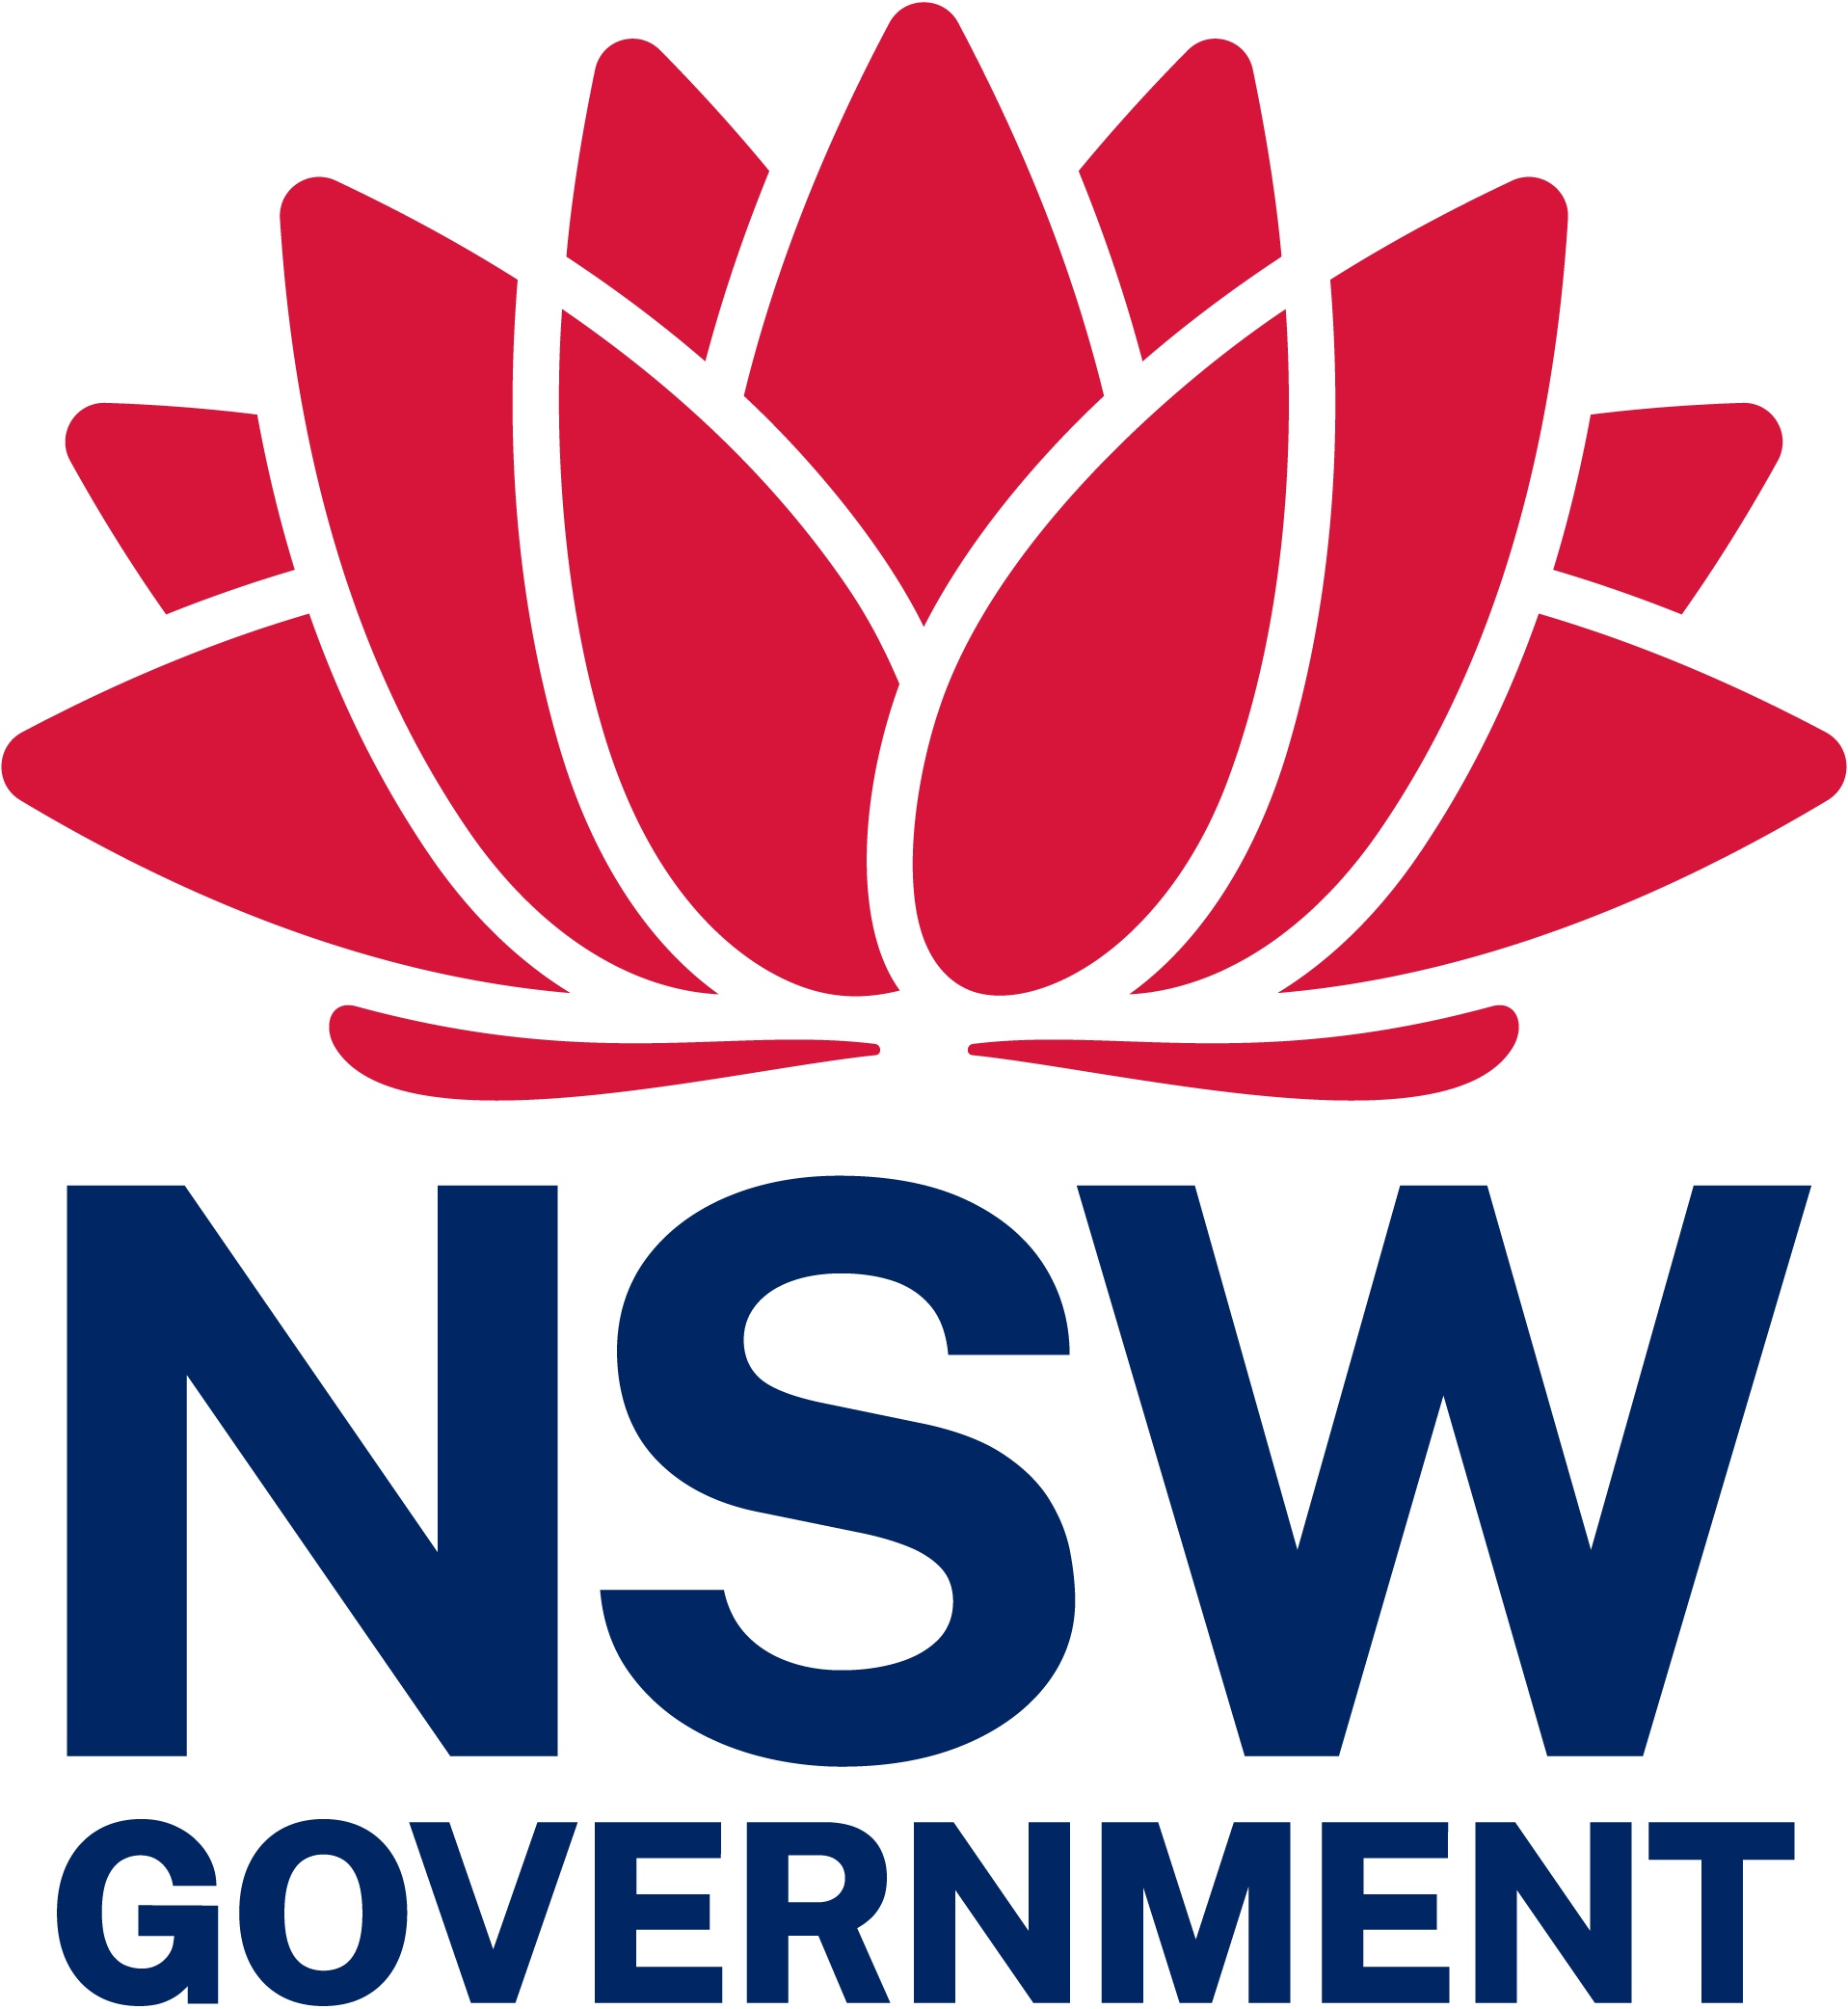 The NSW Government Logo in navy and red